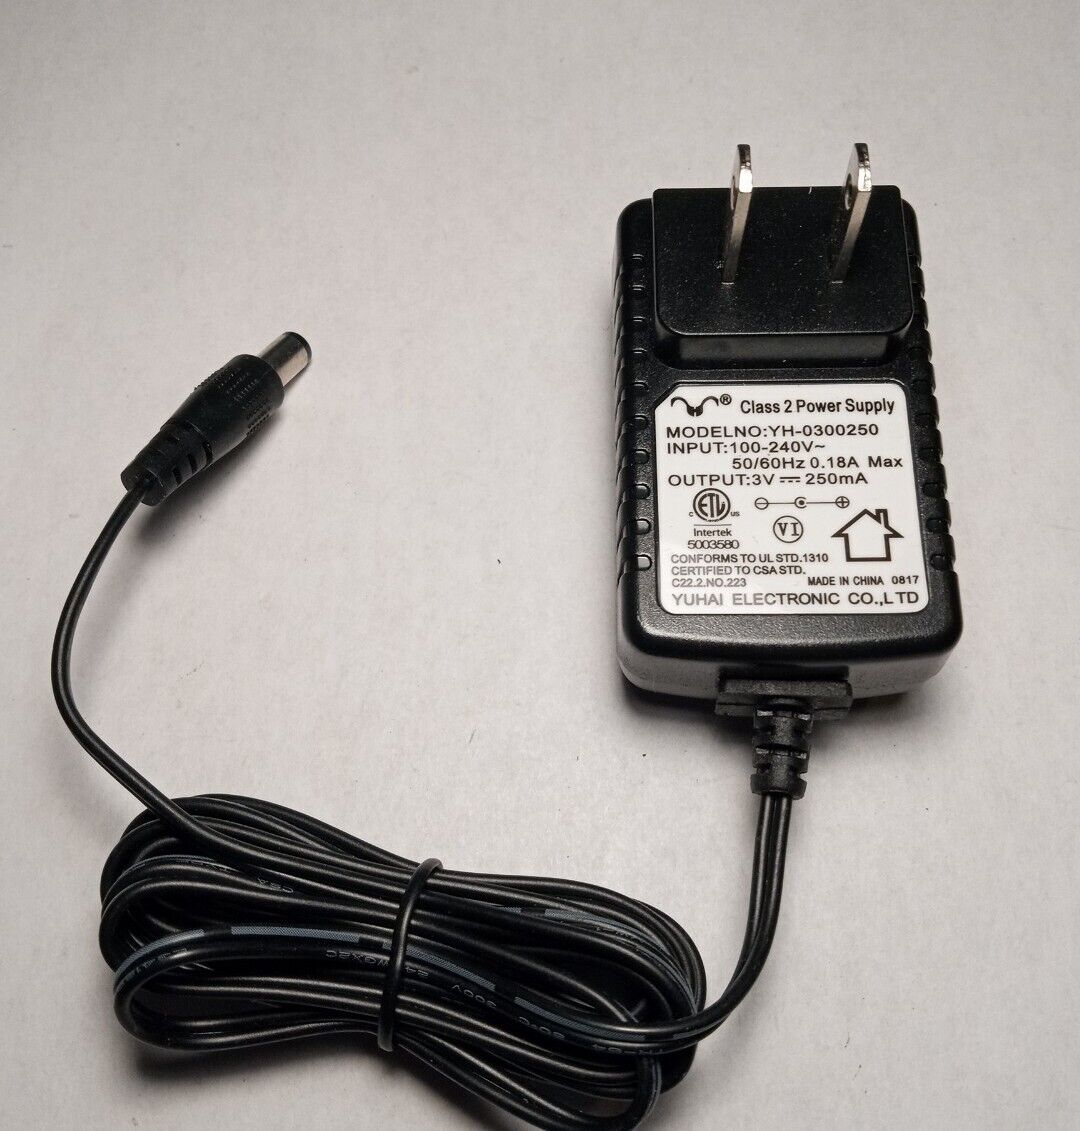 *Brand NEW*Yuhai Electronic YH-0300250 3V 2500mA AC Adaptor Class 2 Power Supply - Click Image to Close